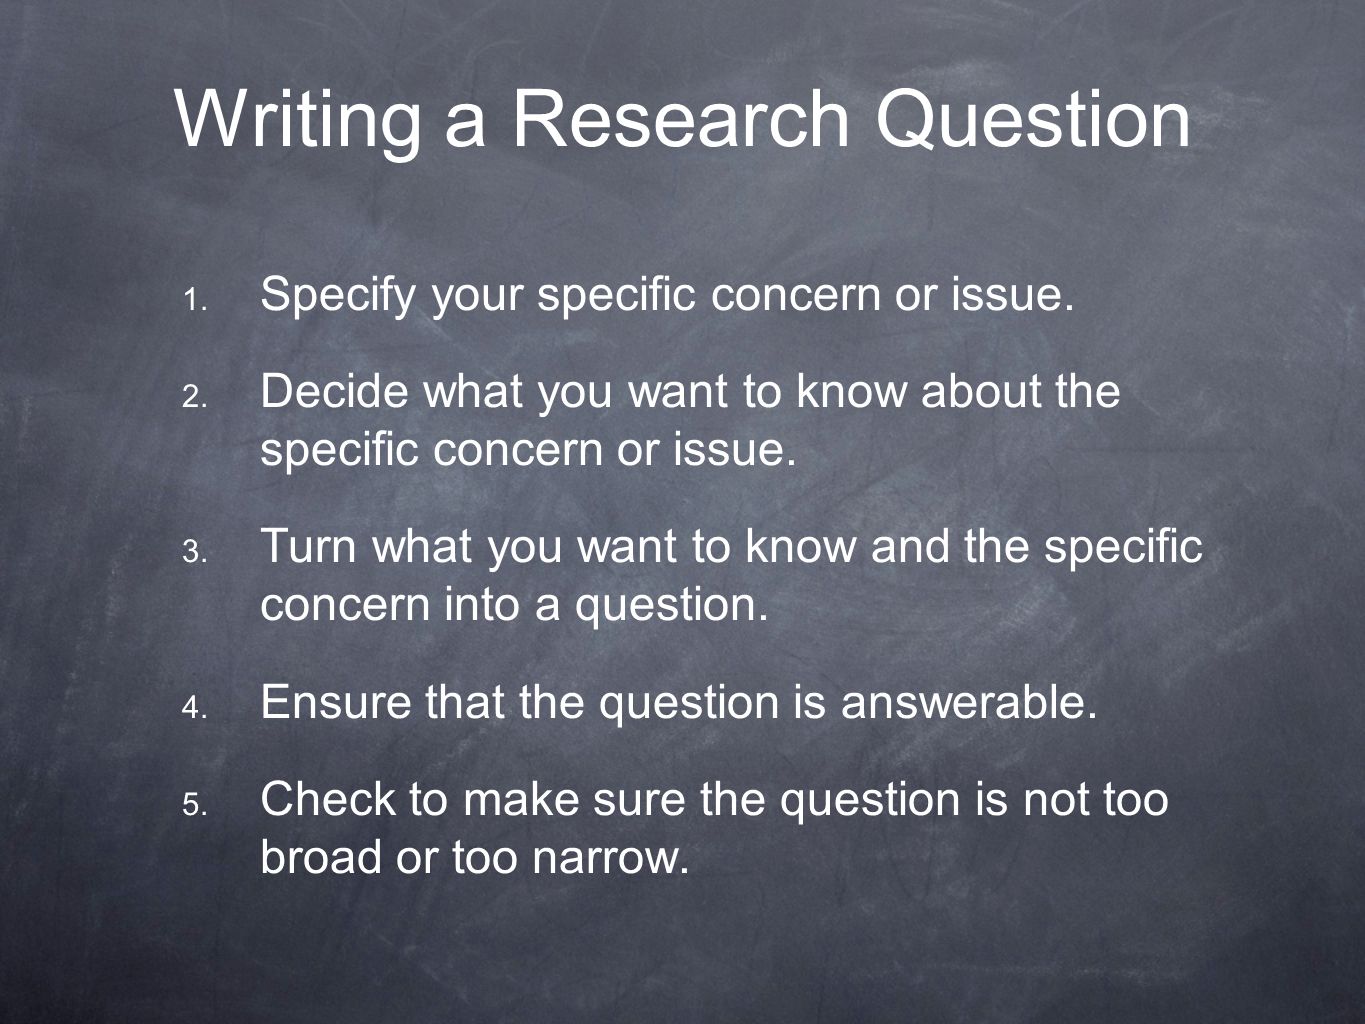 Writing a Research Question 1. Specify your specific concern or issue.